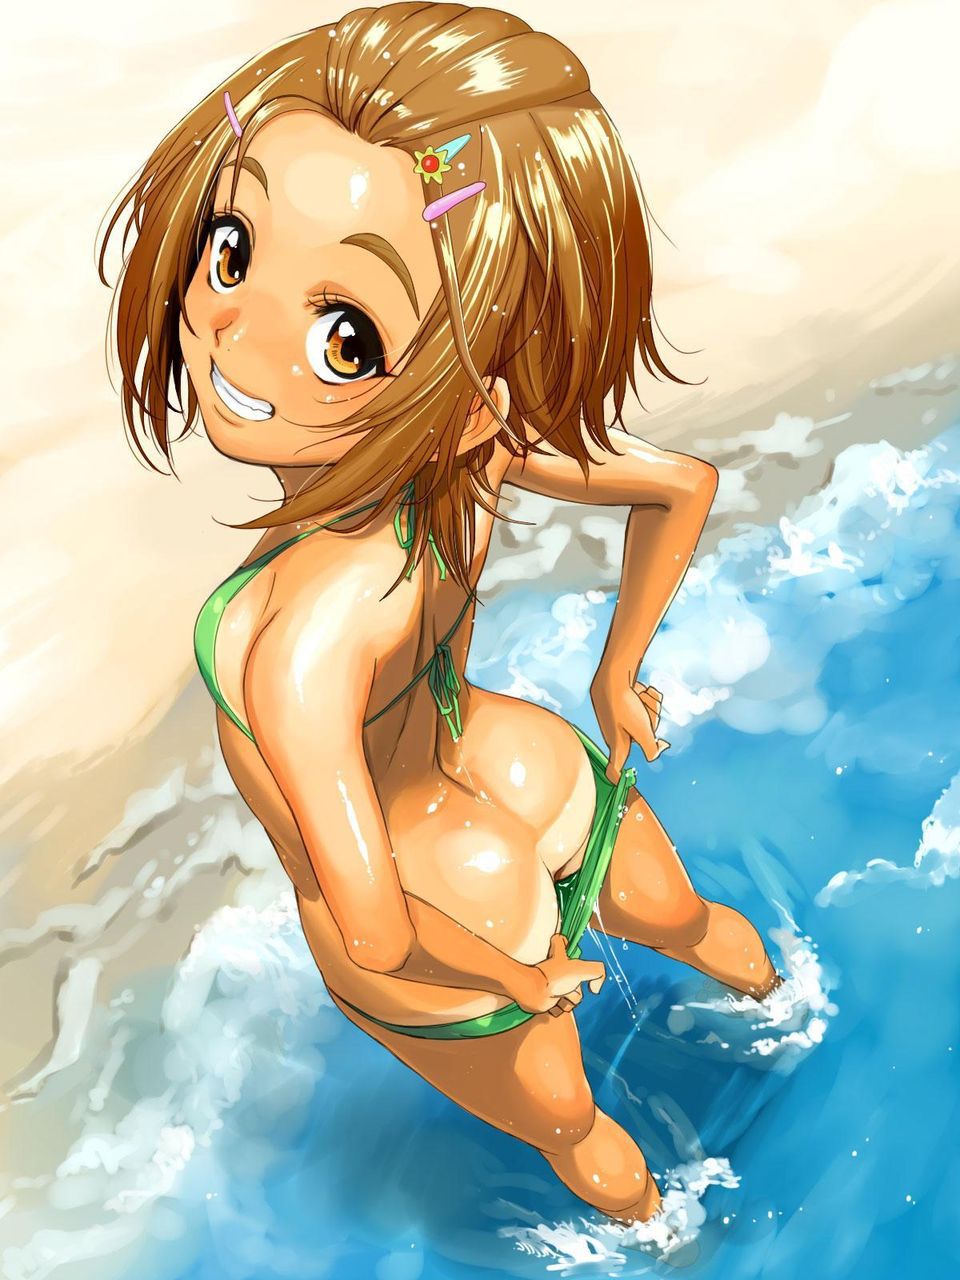 [Swimsuit] can't wait until summer vacation! I want to see a swimsuit and a bikini girl! Part 5 [2-d] 34